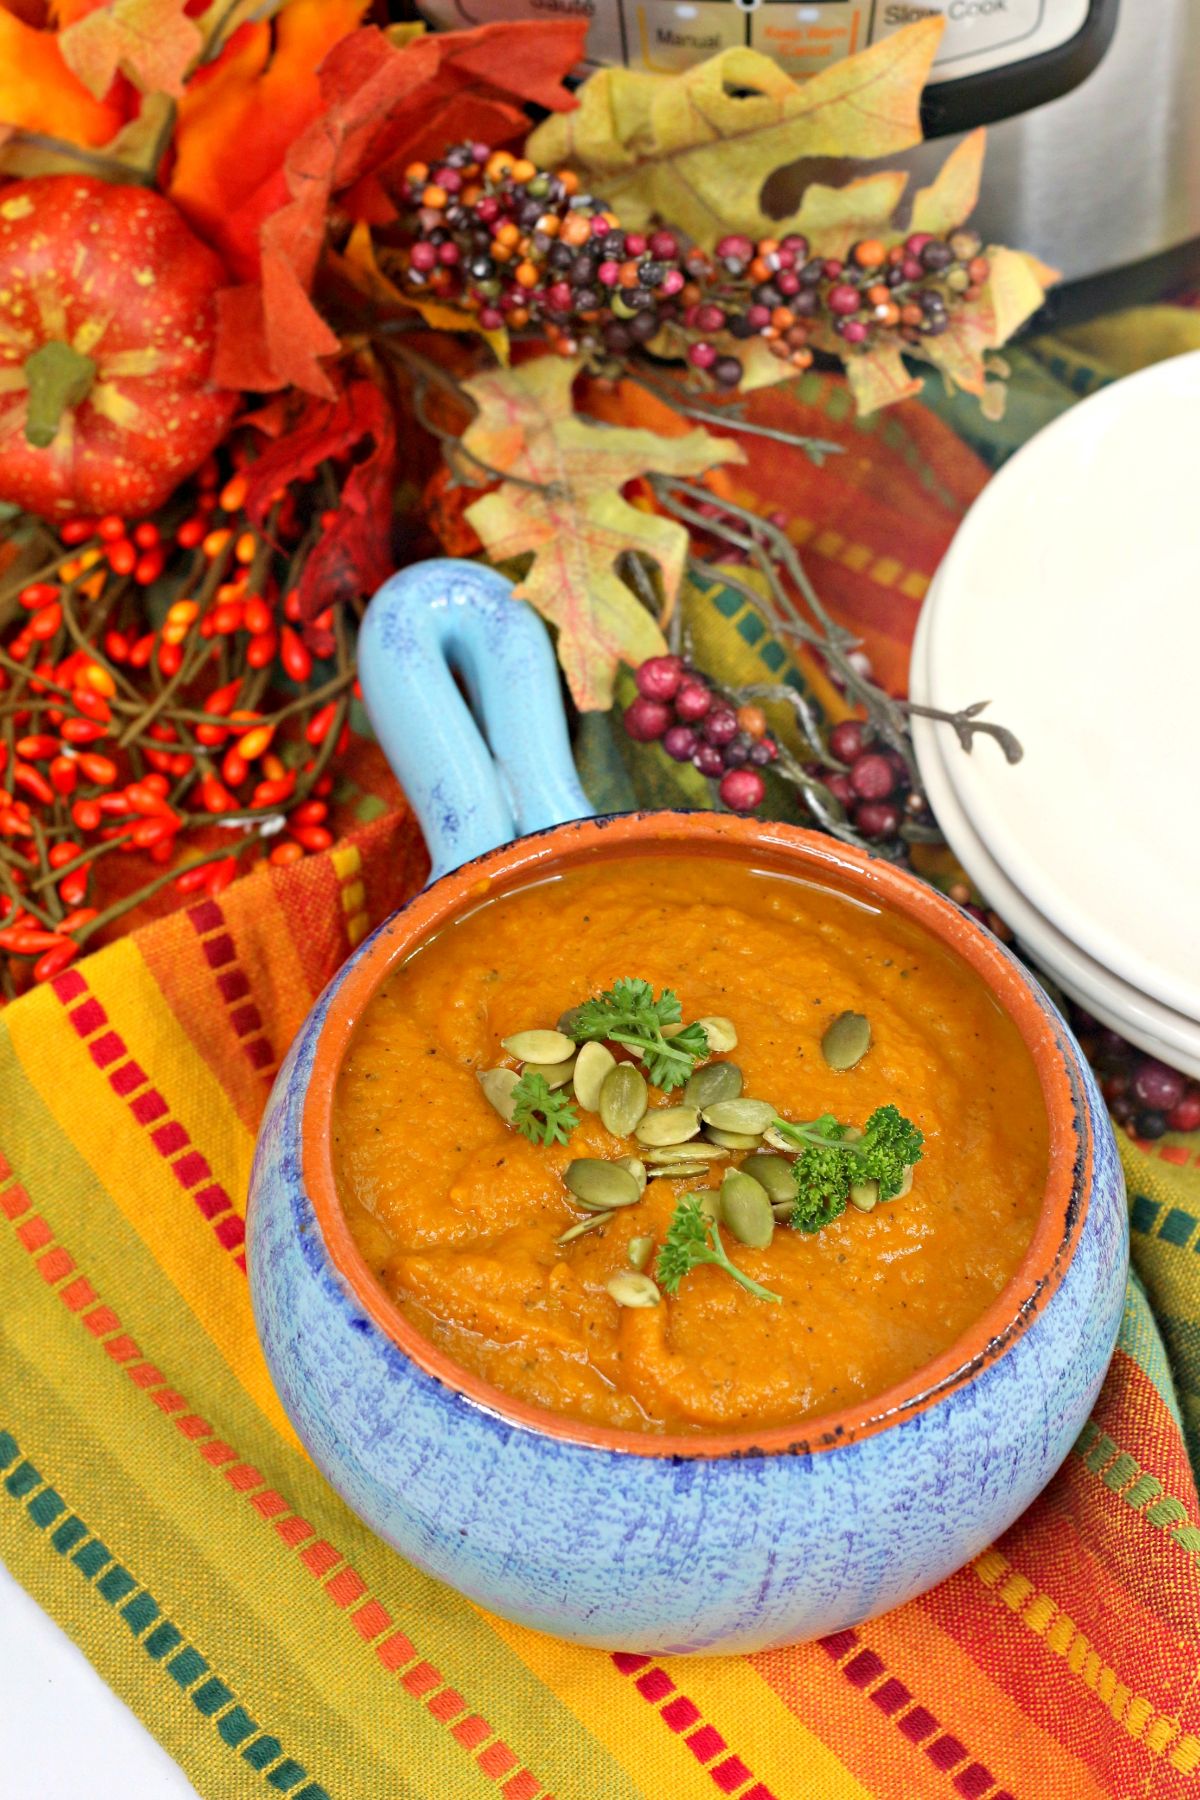 A vertical image of Instant Pot Pumpkin Soup in a blue ceramic bowl with orange interior and highlights the soup toppings pumpkin seeds and parsley.